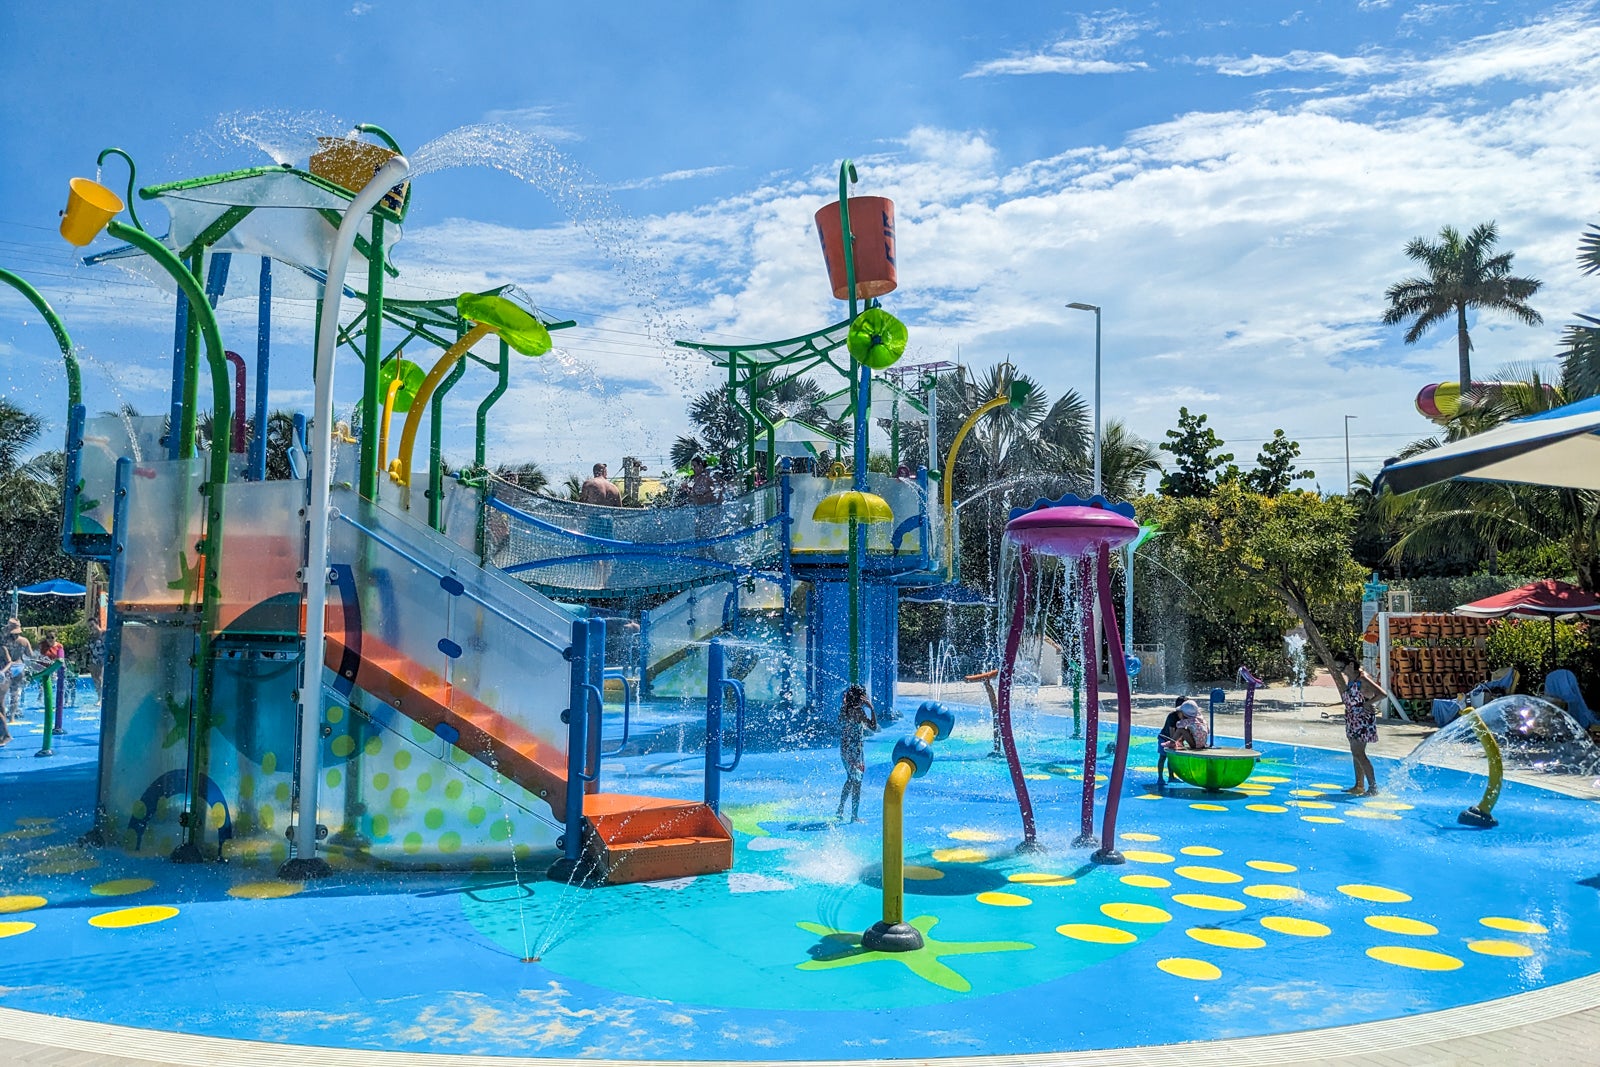 Water play sprayers and climbing structure on Bahamian island